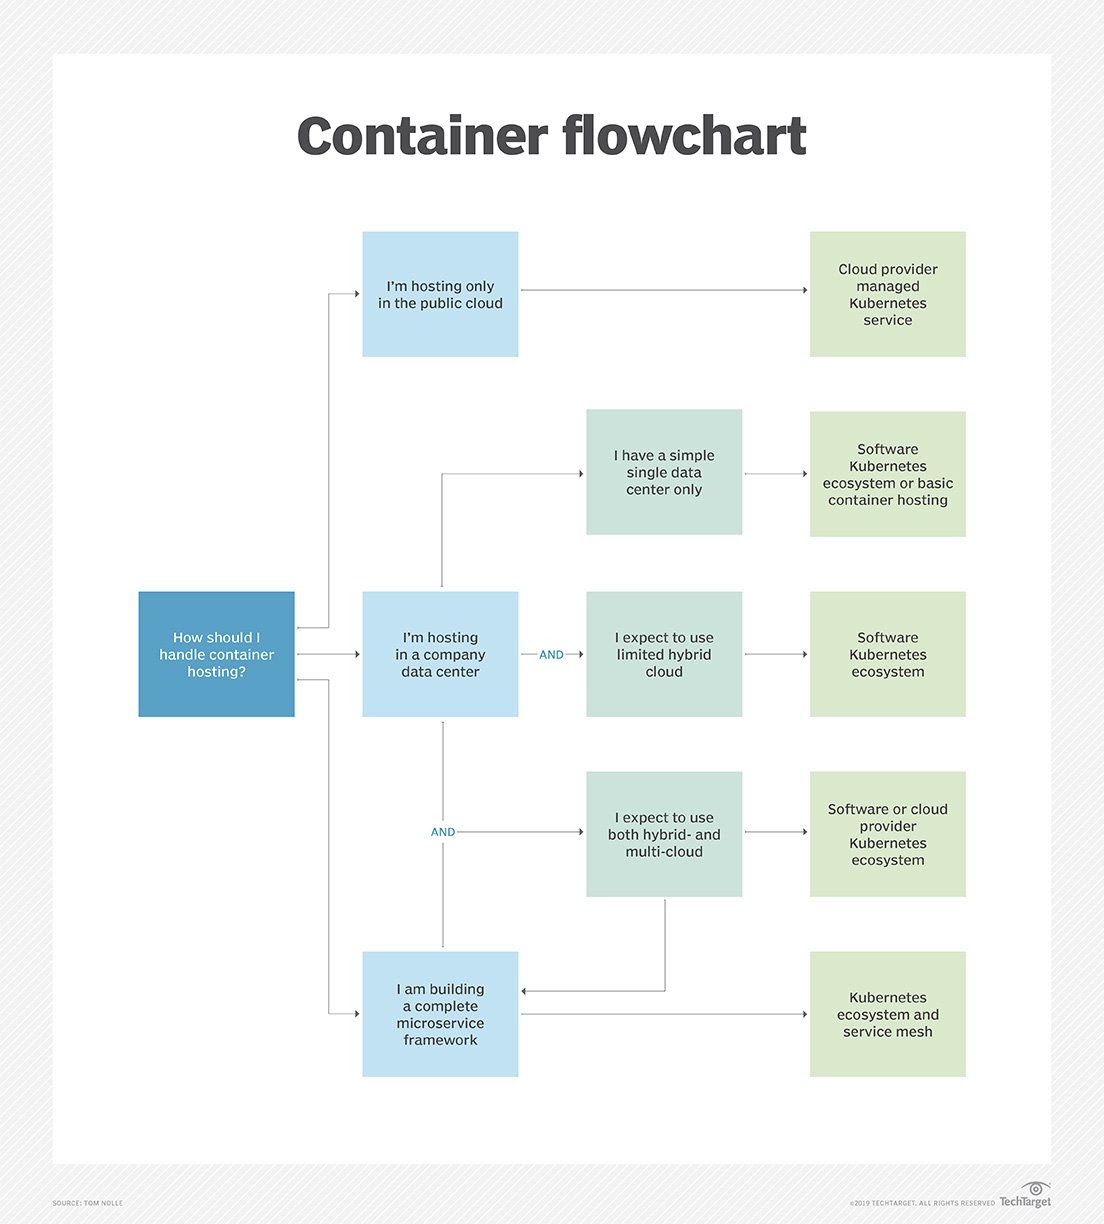 Container flowchart